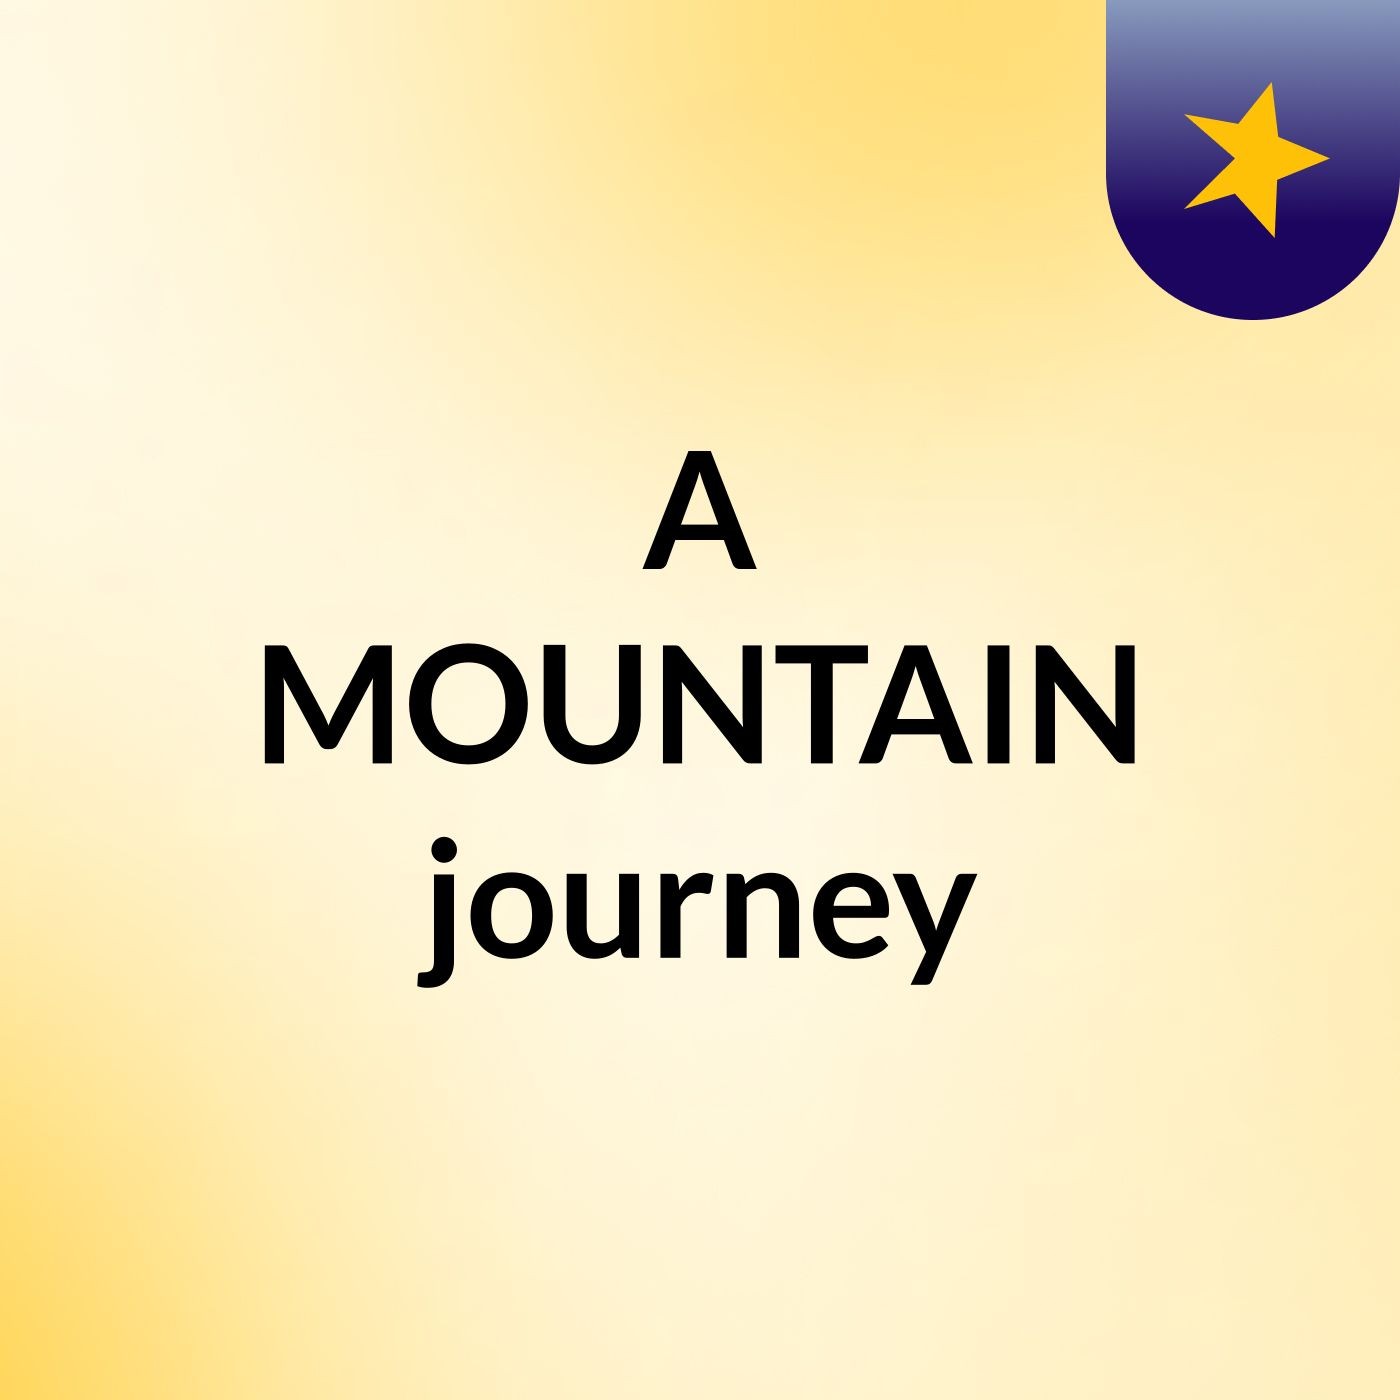 A MOUNTAIN journey